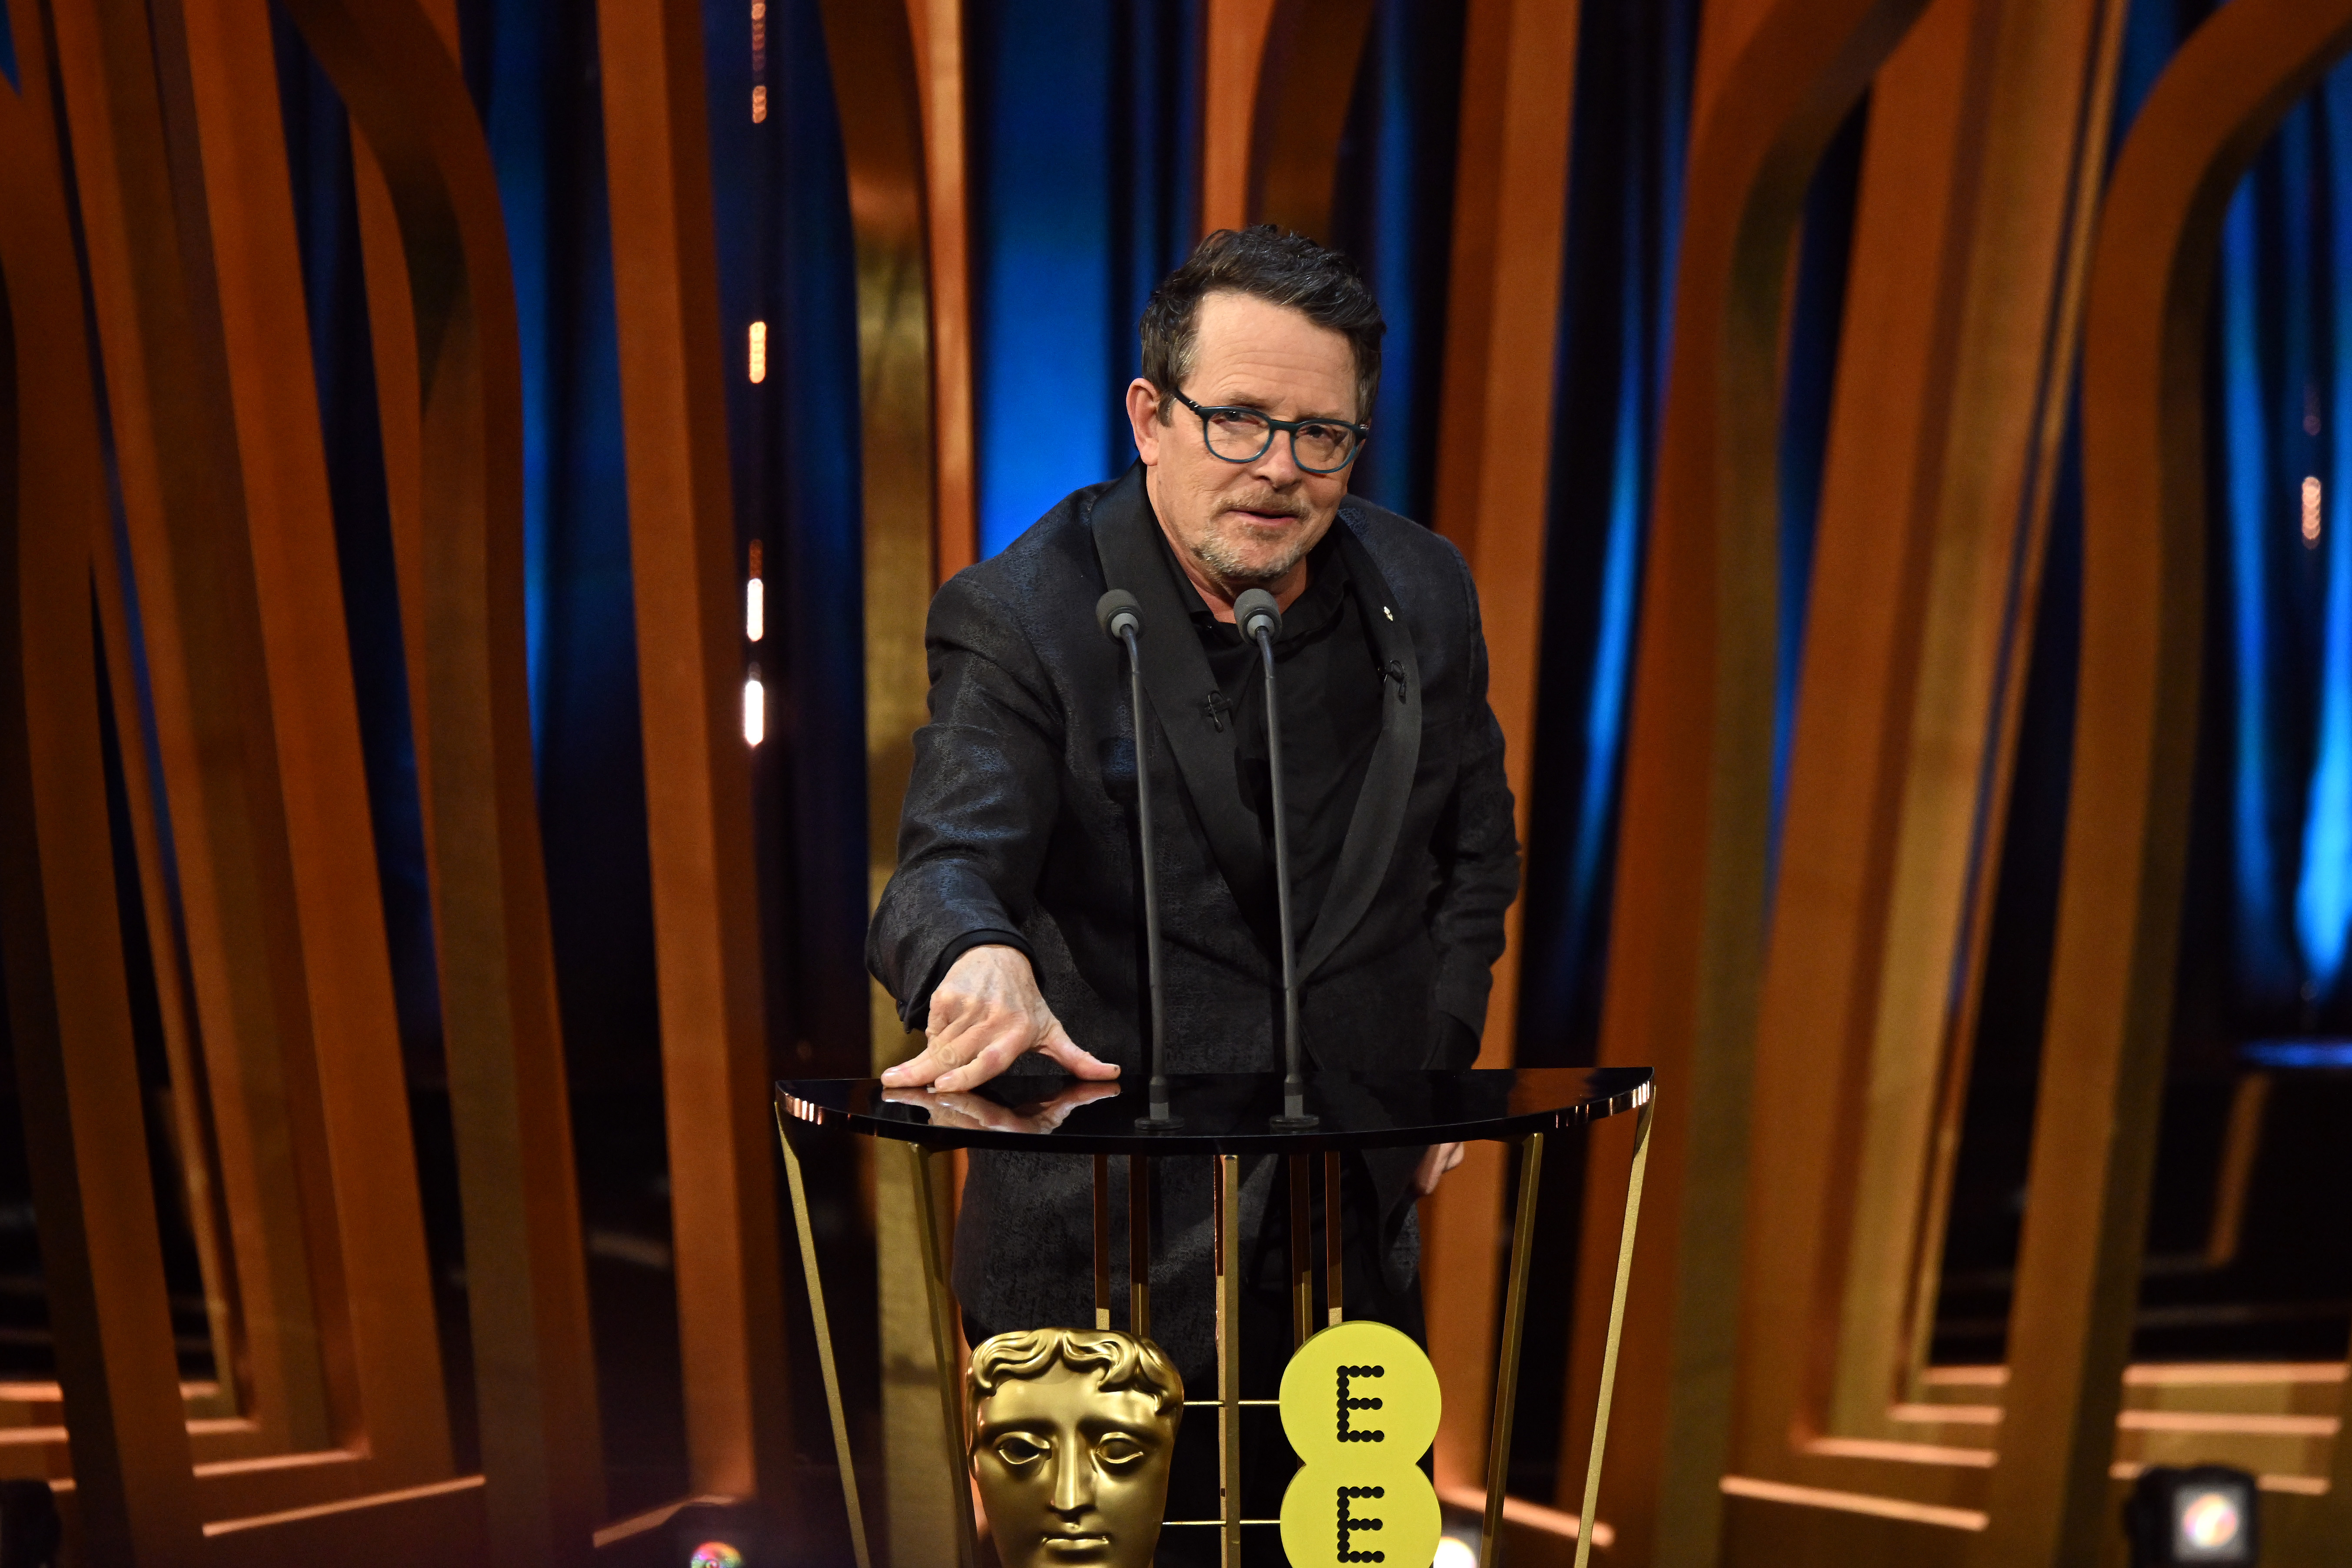 Michael J Fox presents the Best Film Award on stage during the EE BAFTA Film Awards at The Royal Festival Hall in London, England, on February 18, 2024. | Source: Getty Images